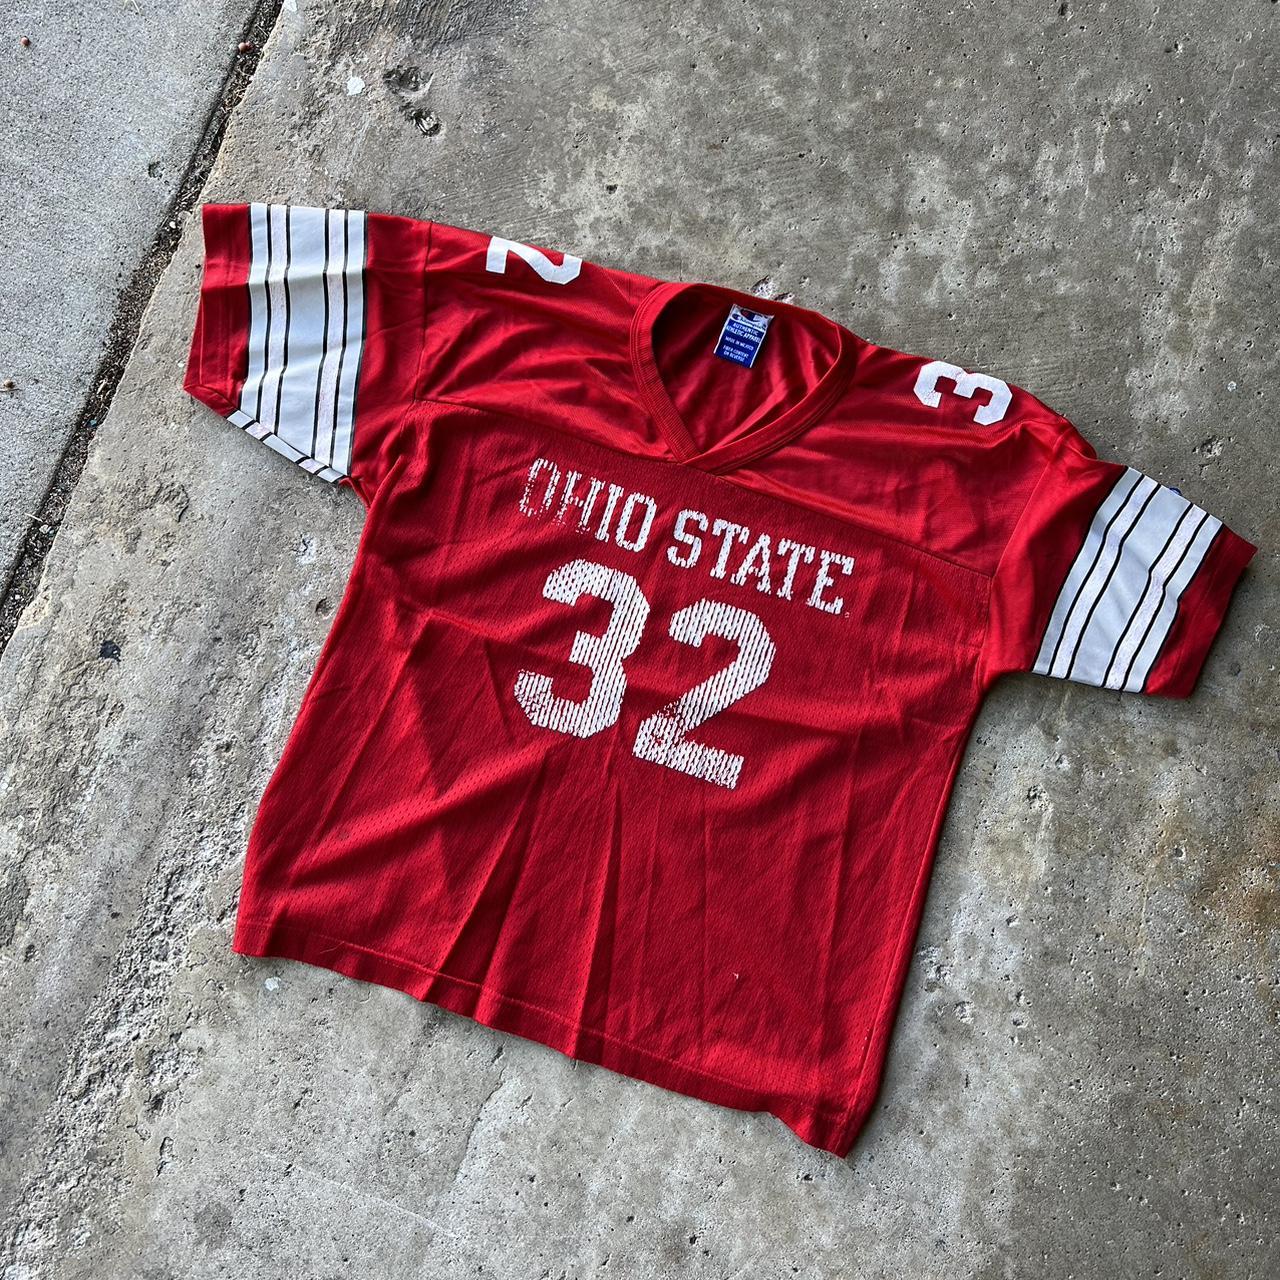 Red Mesh Football jersey. Vintage Champion, likely - Depop